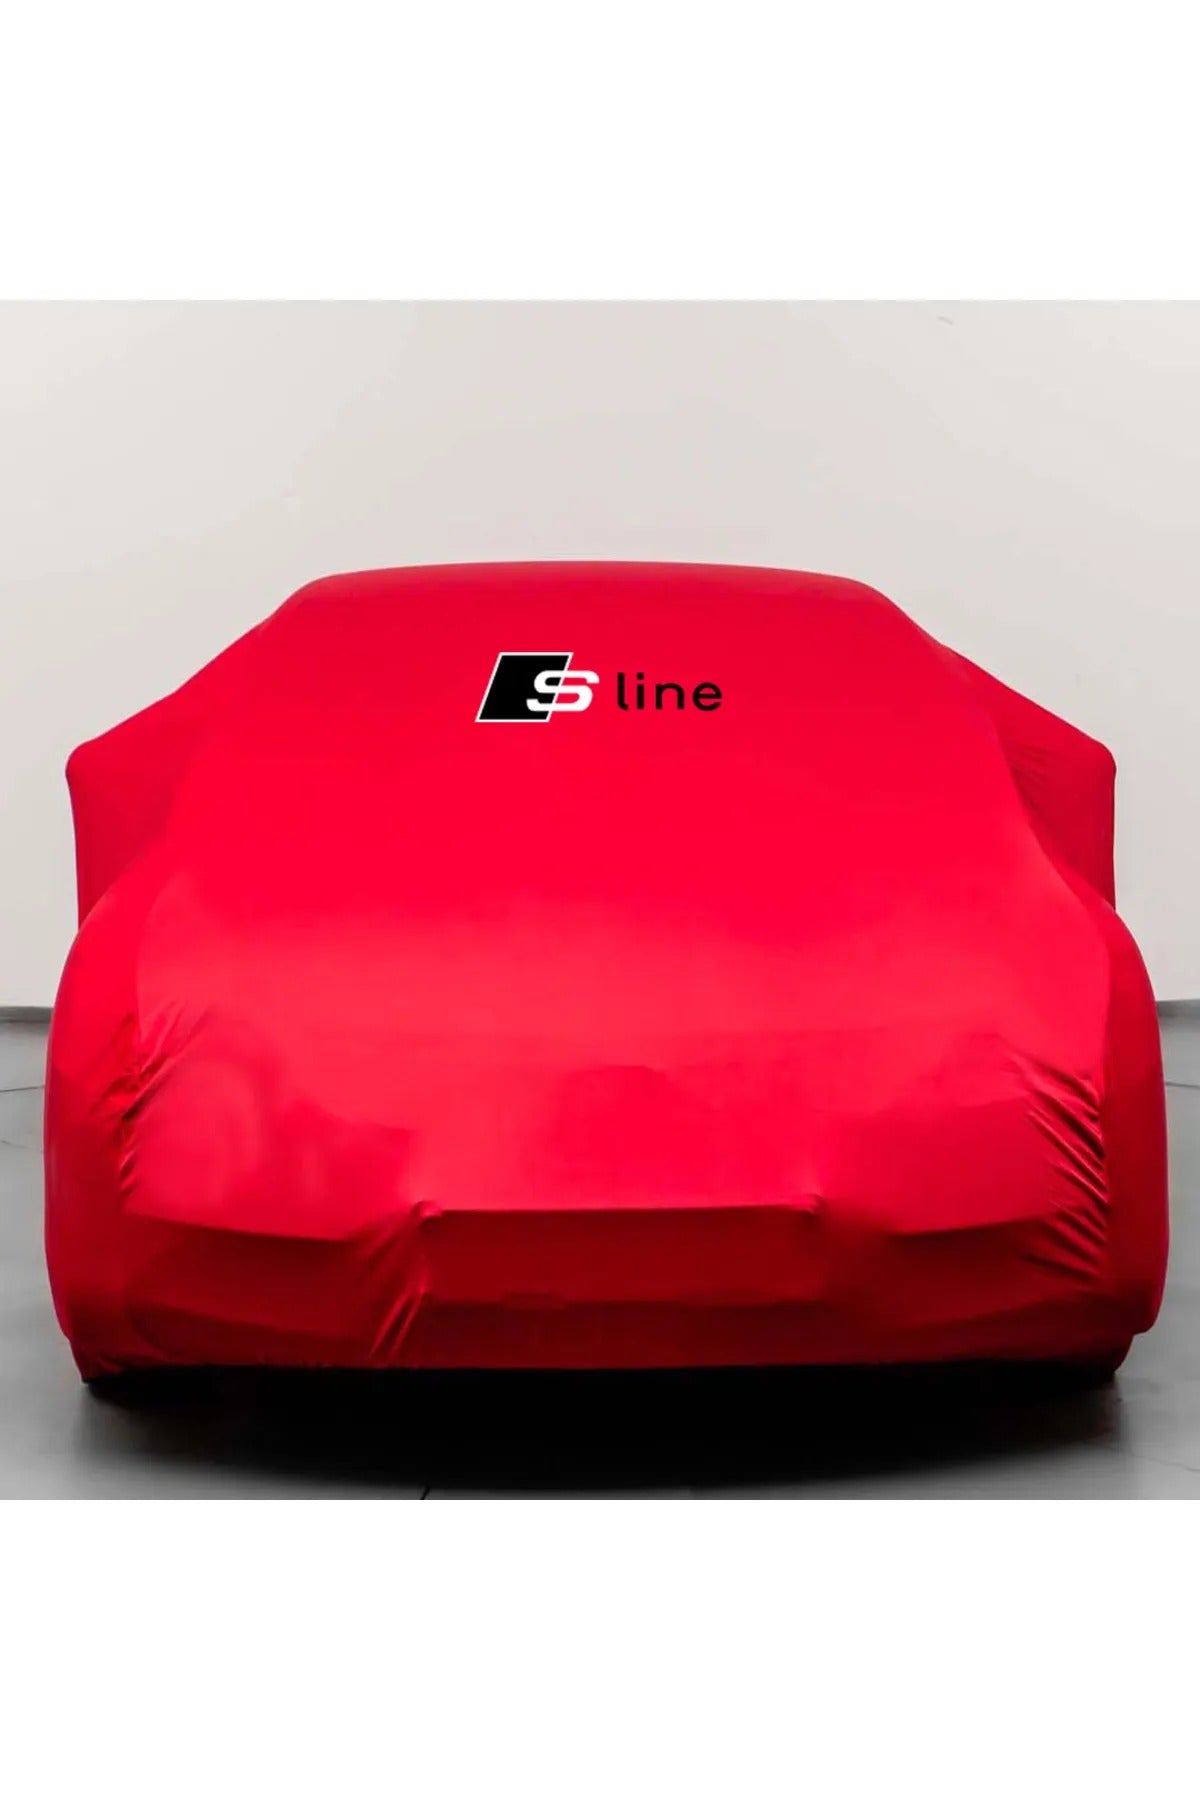 AUDİ S-LİNE Car Cover✓Tailor Made for Your Vehicle, AUDİ Vehicle Car C –  Premium CarCover